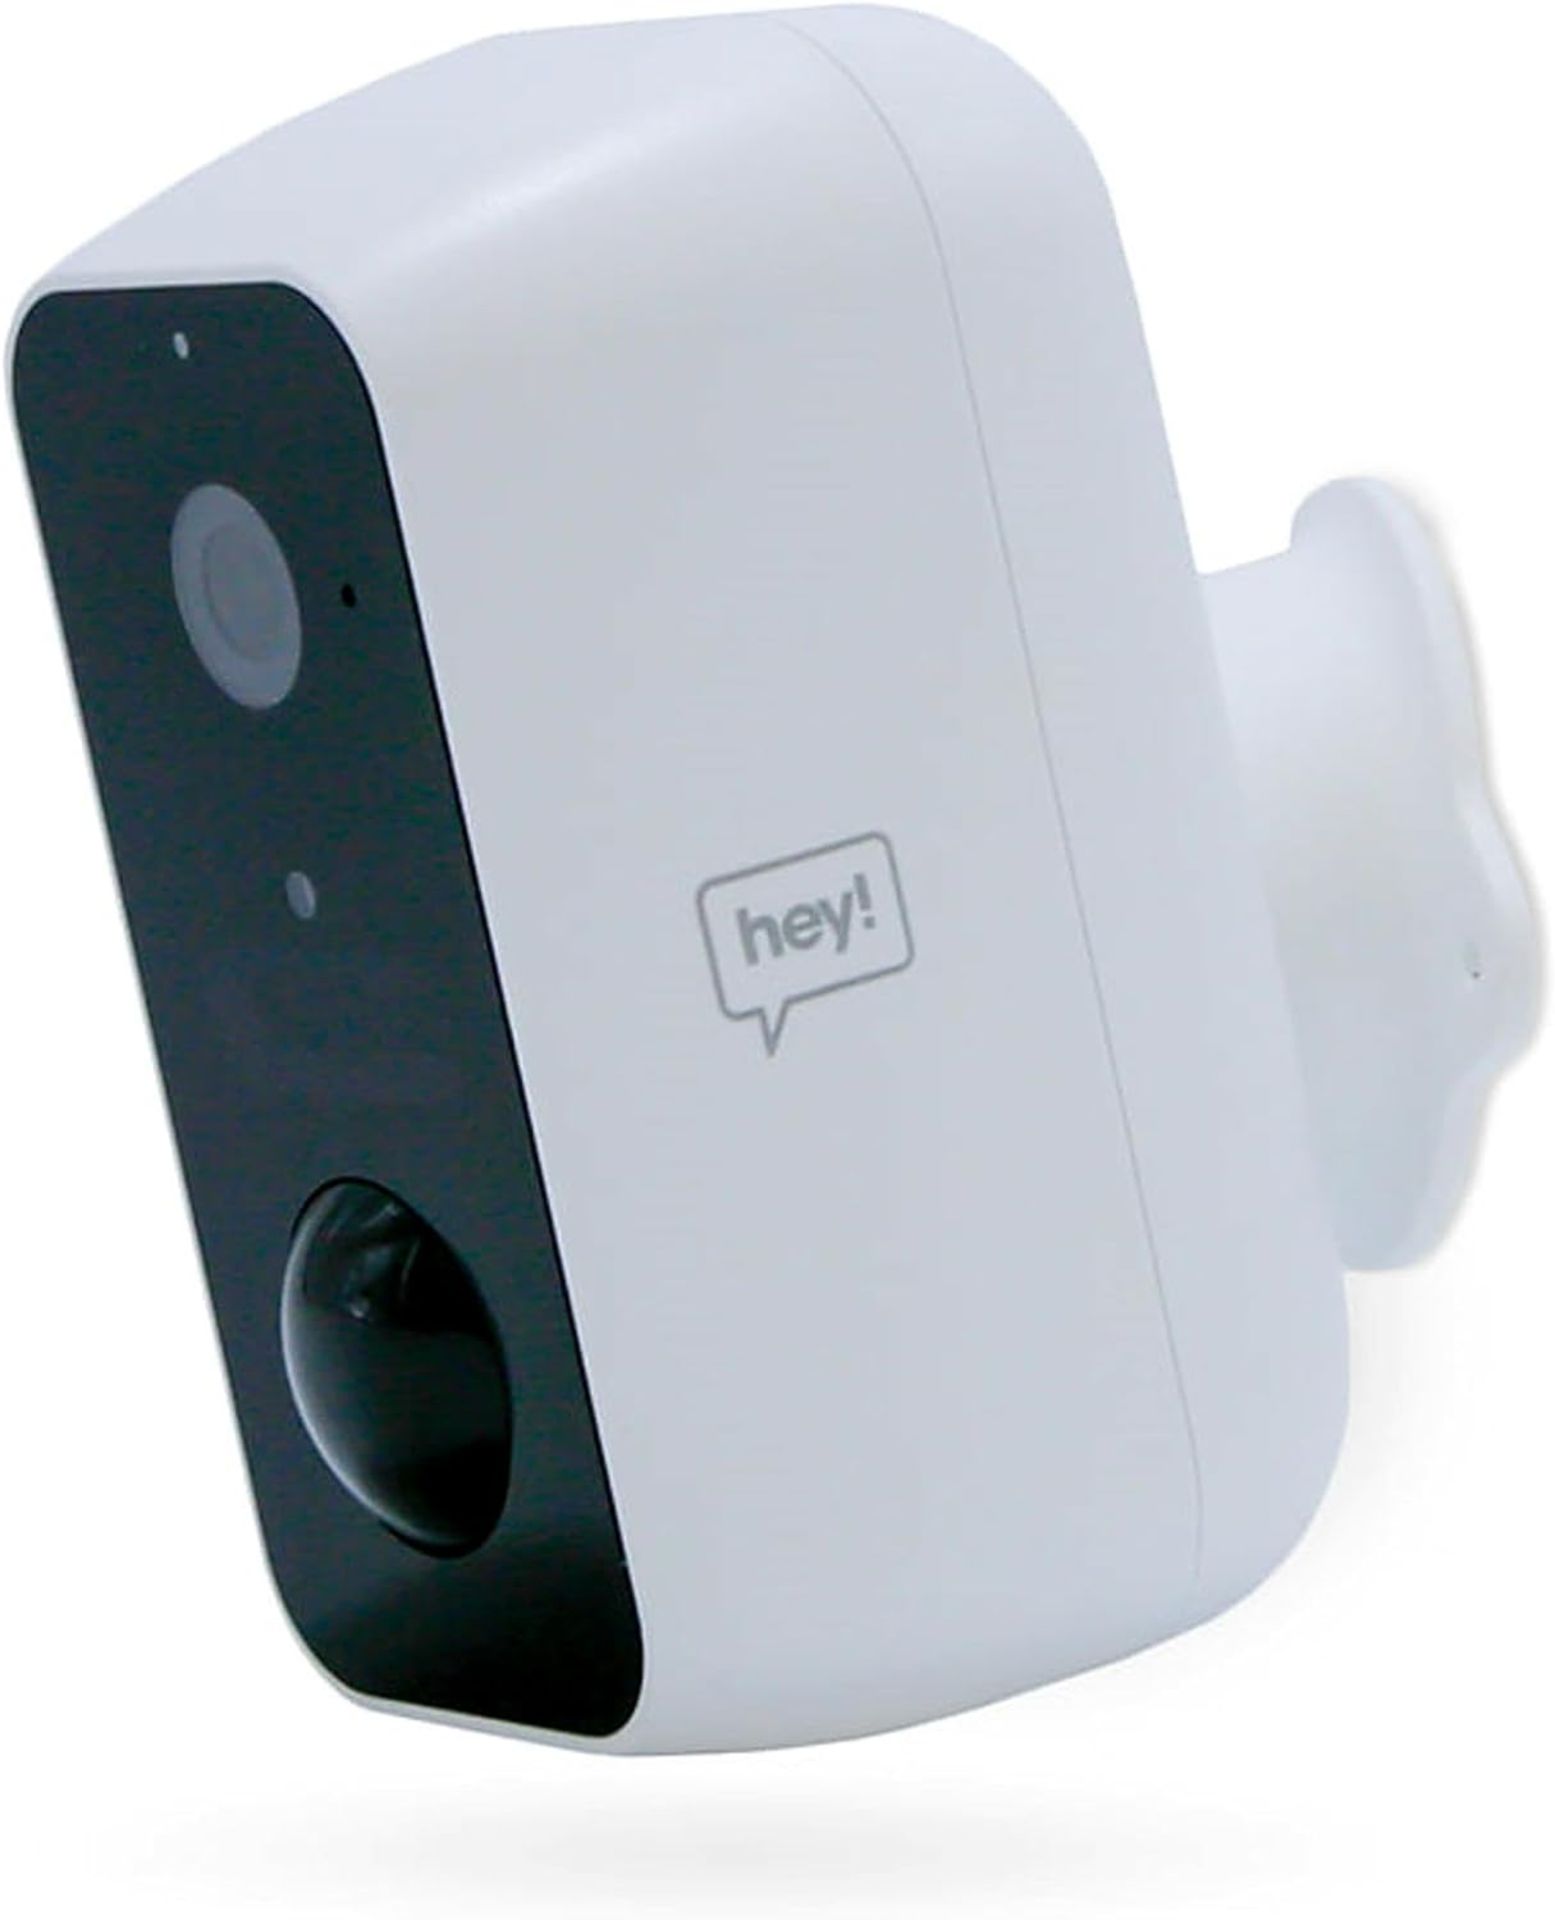 3x NEW & BOXED HEY! SMART Outdoor Wireless Security Camera. RRP £74.99 EACH. Outdoor Home Security - Image 2 of 6